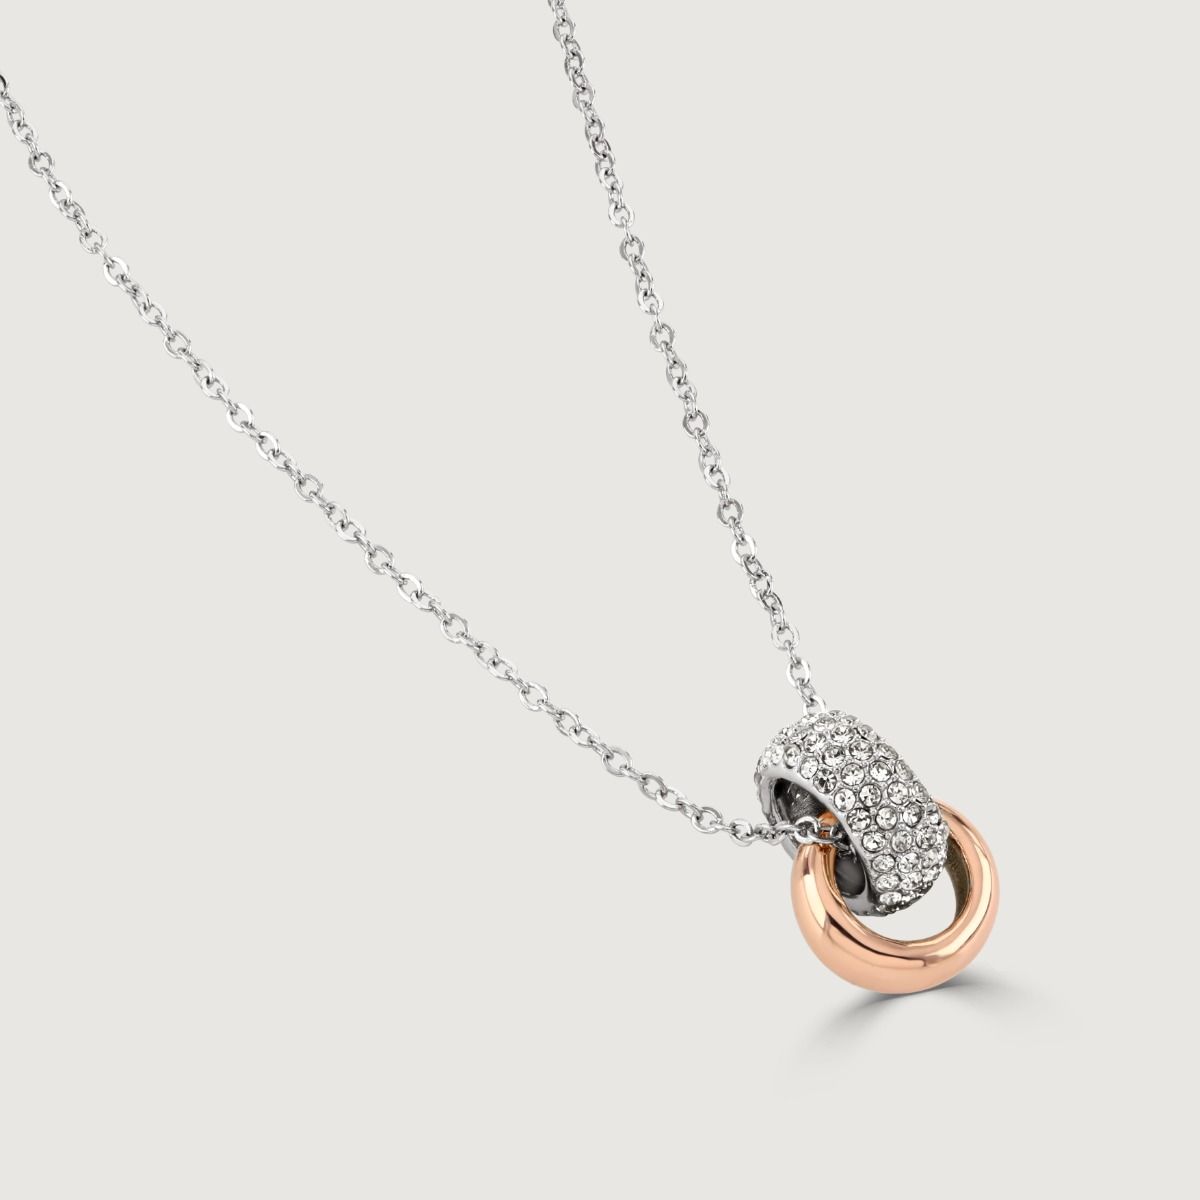 The polished crystal two-tone duo pendant is a bestseller. The pairing of the two-tone plating and crystals, allows this to be an everyday favourite.